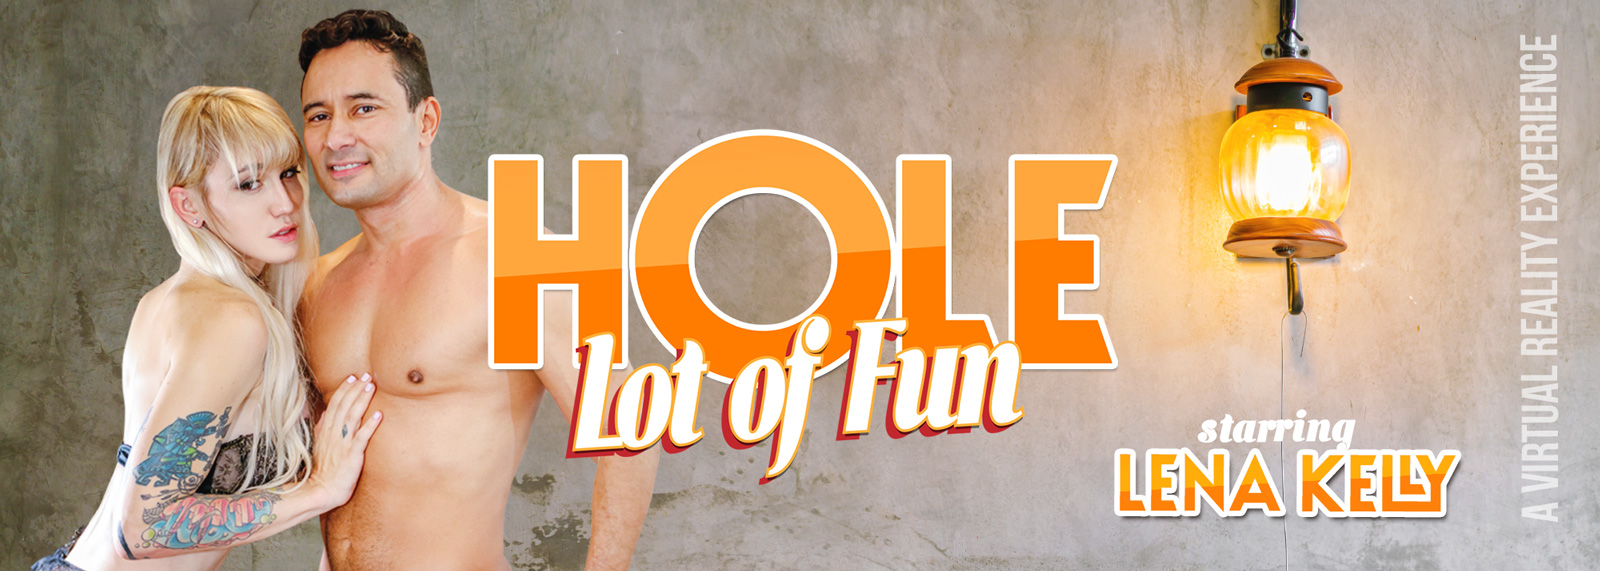 A Hole Lot of Fun - Trans VR Porn Video, Starring: Lena Kelly